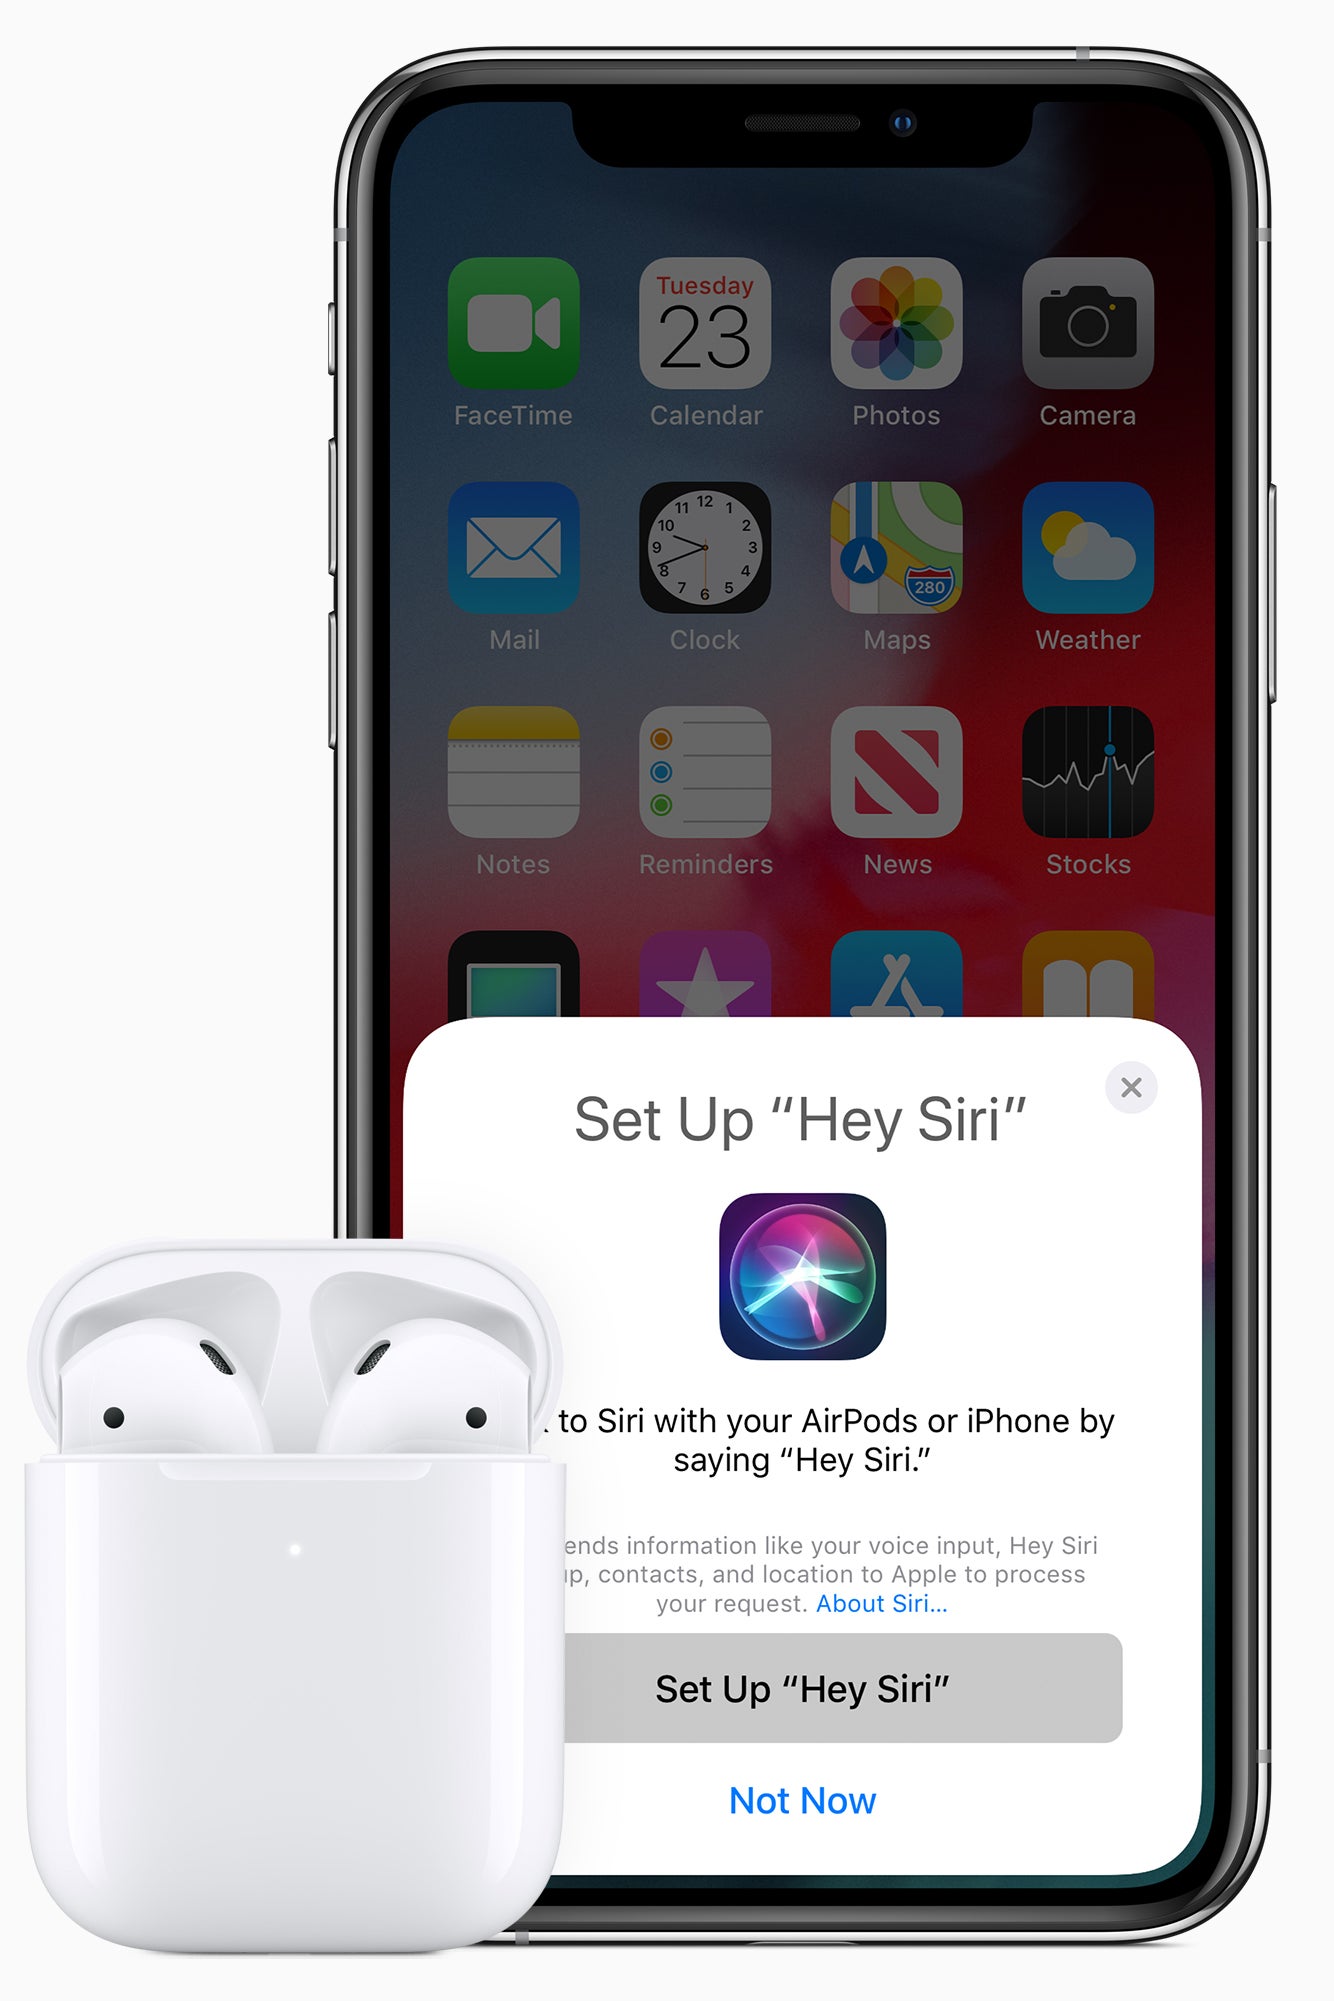 AirPods next to an iPhone whose screen says "Set up 'Hey Siri.'"